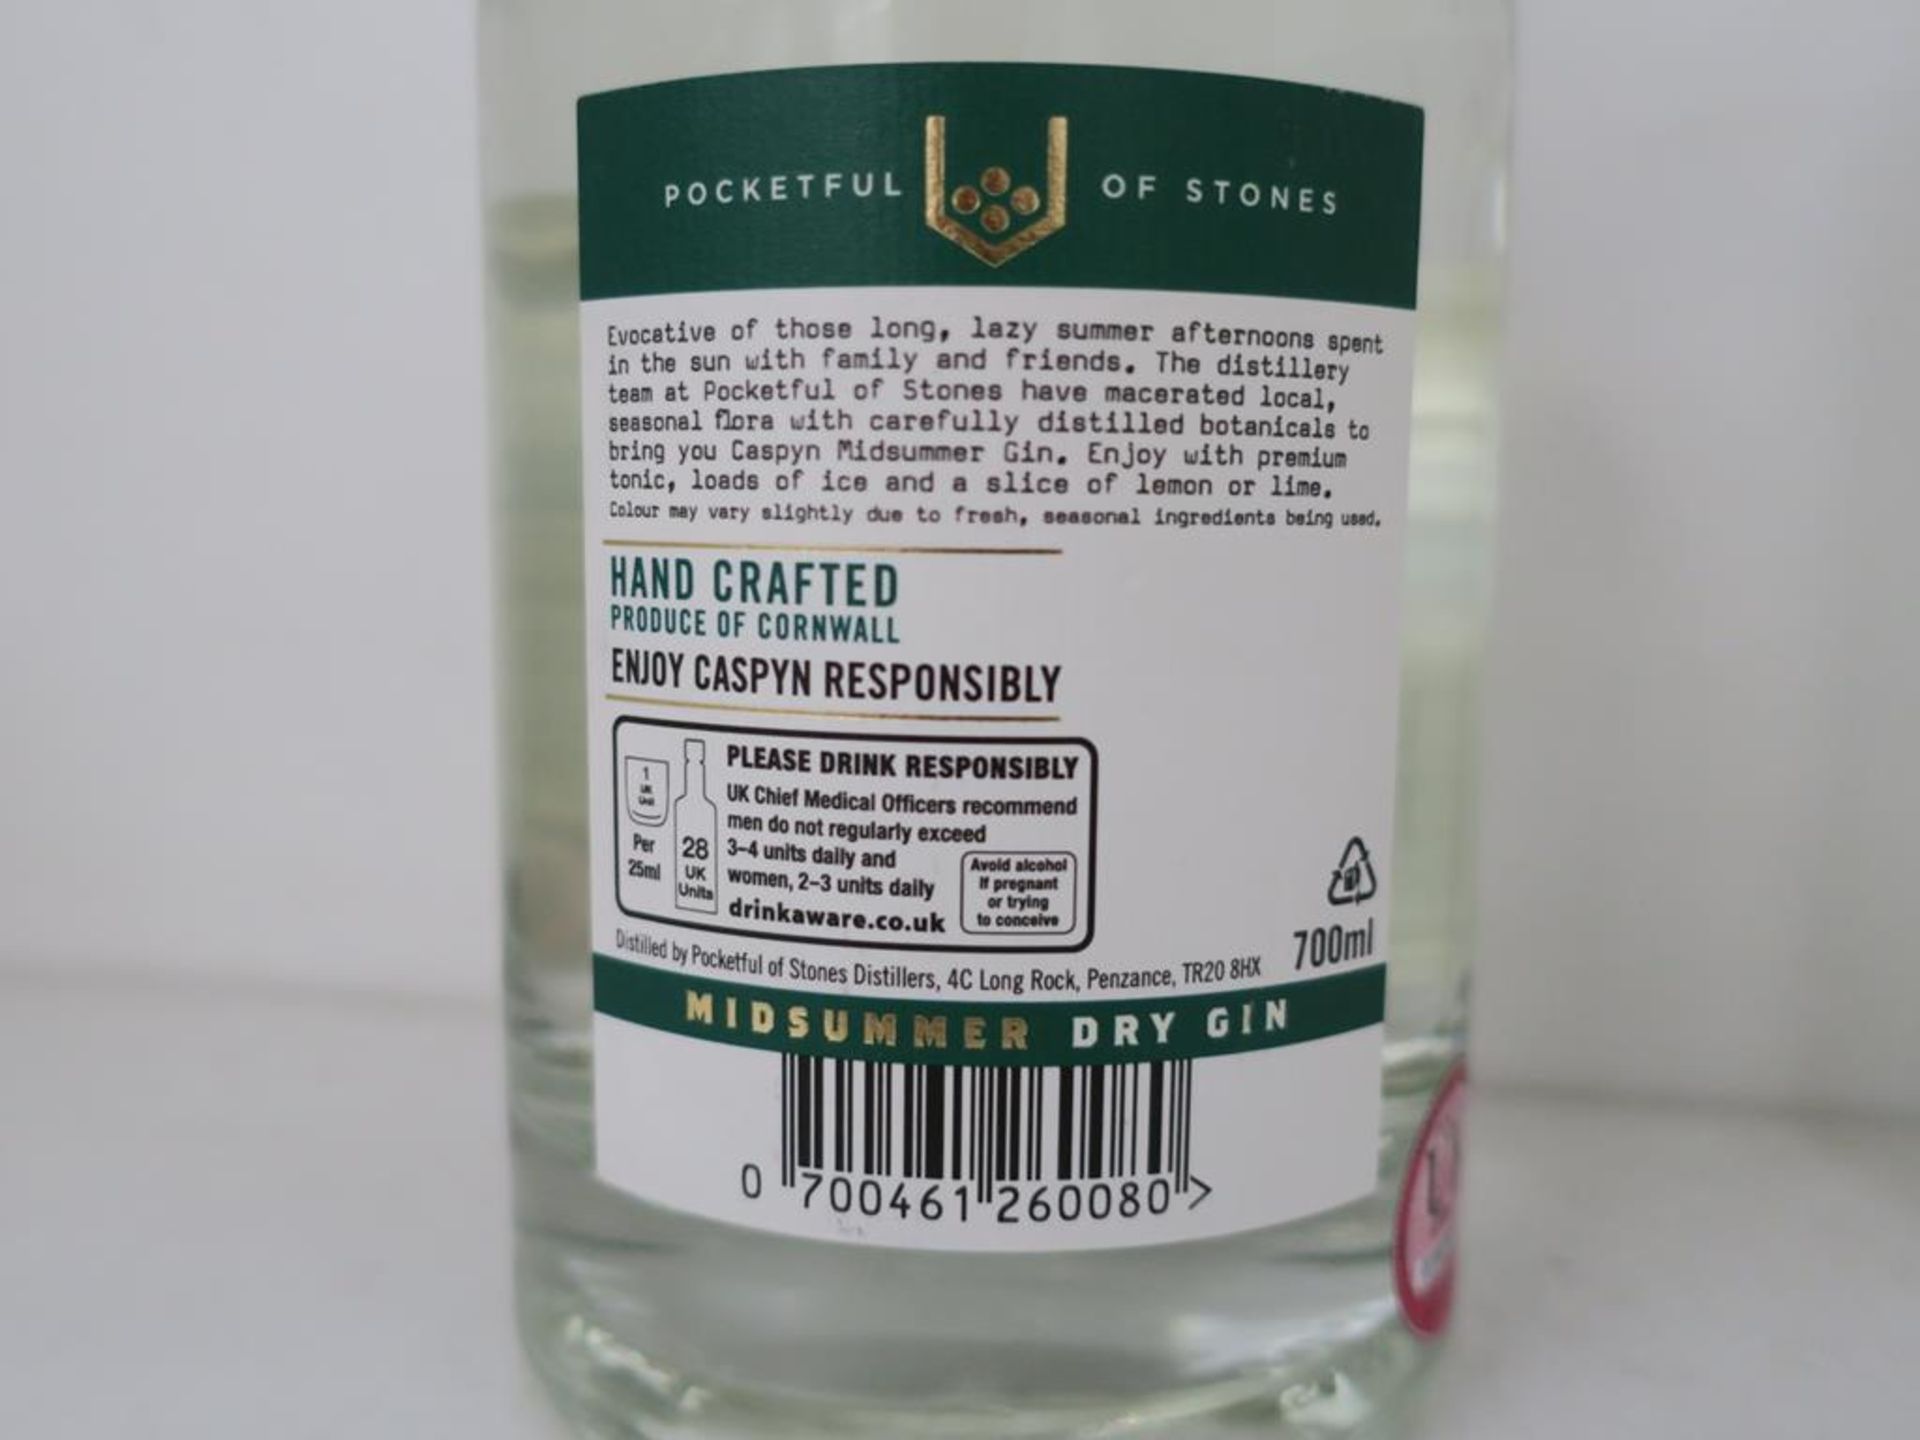 * Three bottles of Gin: a 70cl bottle of Caspyn Midsummer Dry Gin 40% vol, a 70cl bottle of 987 - Image 5 of 7